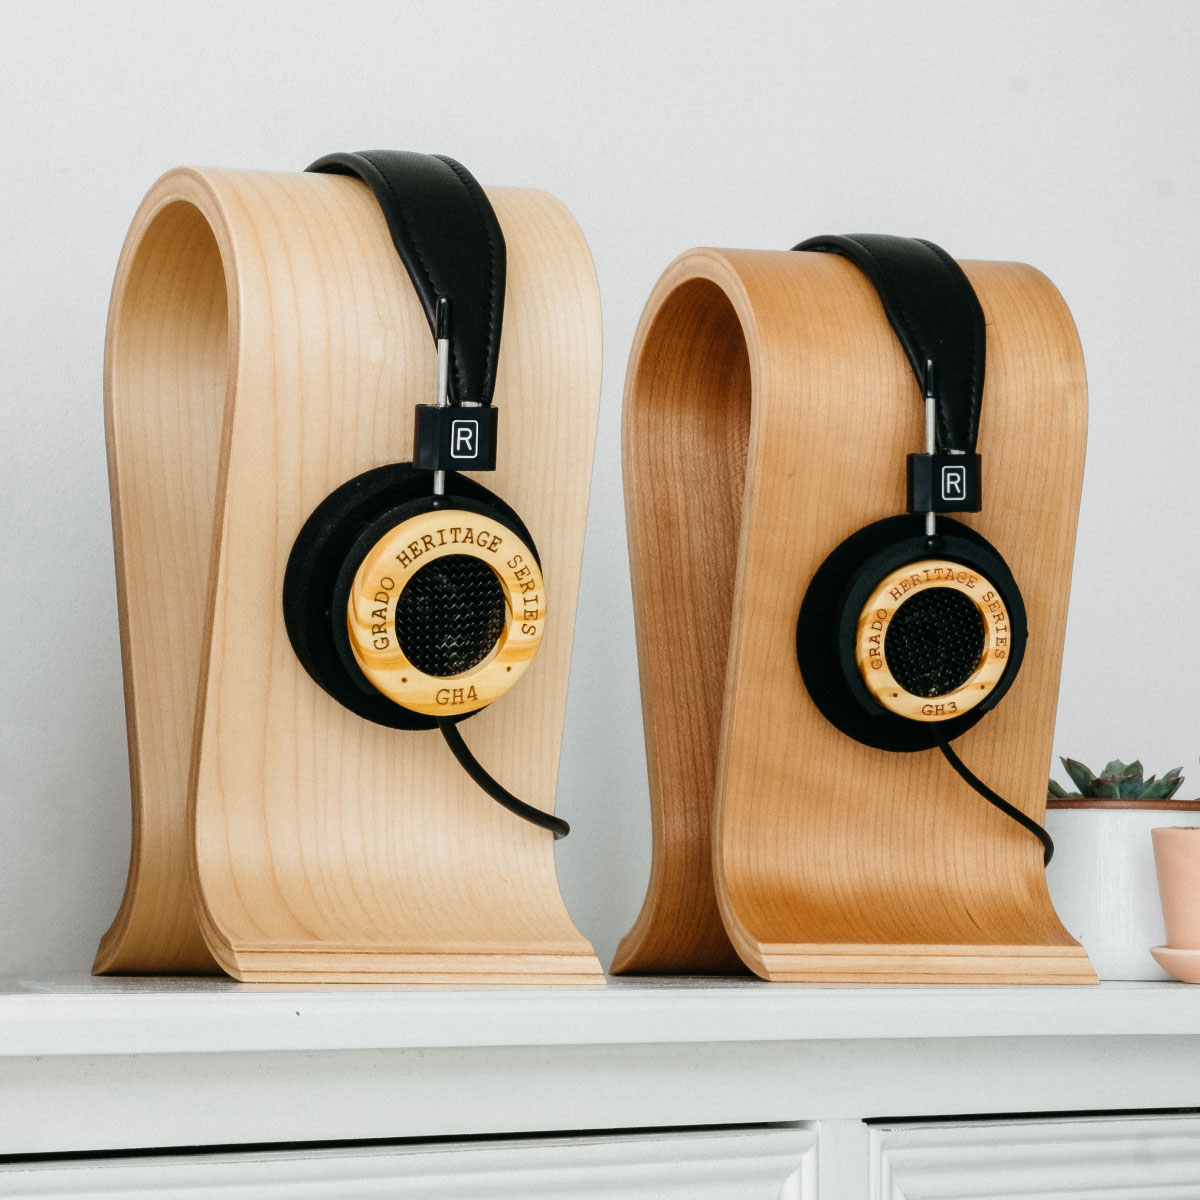 Photo of GH3 and GH4 headphones on wooden headphone stands